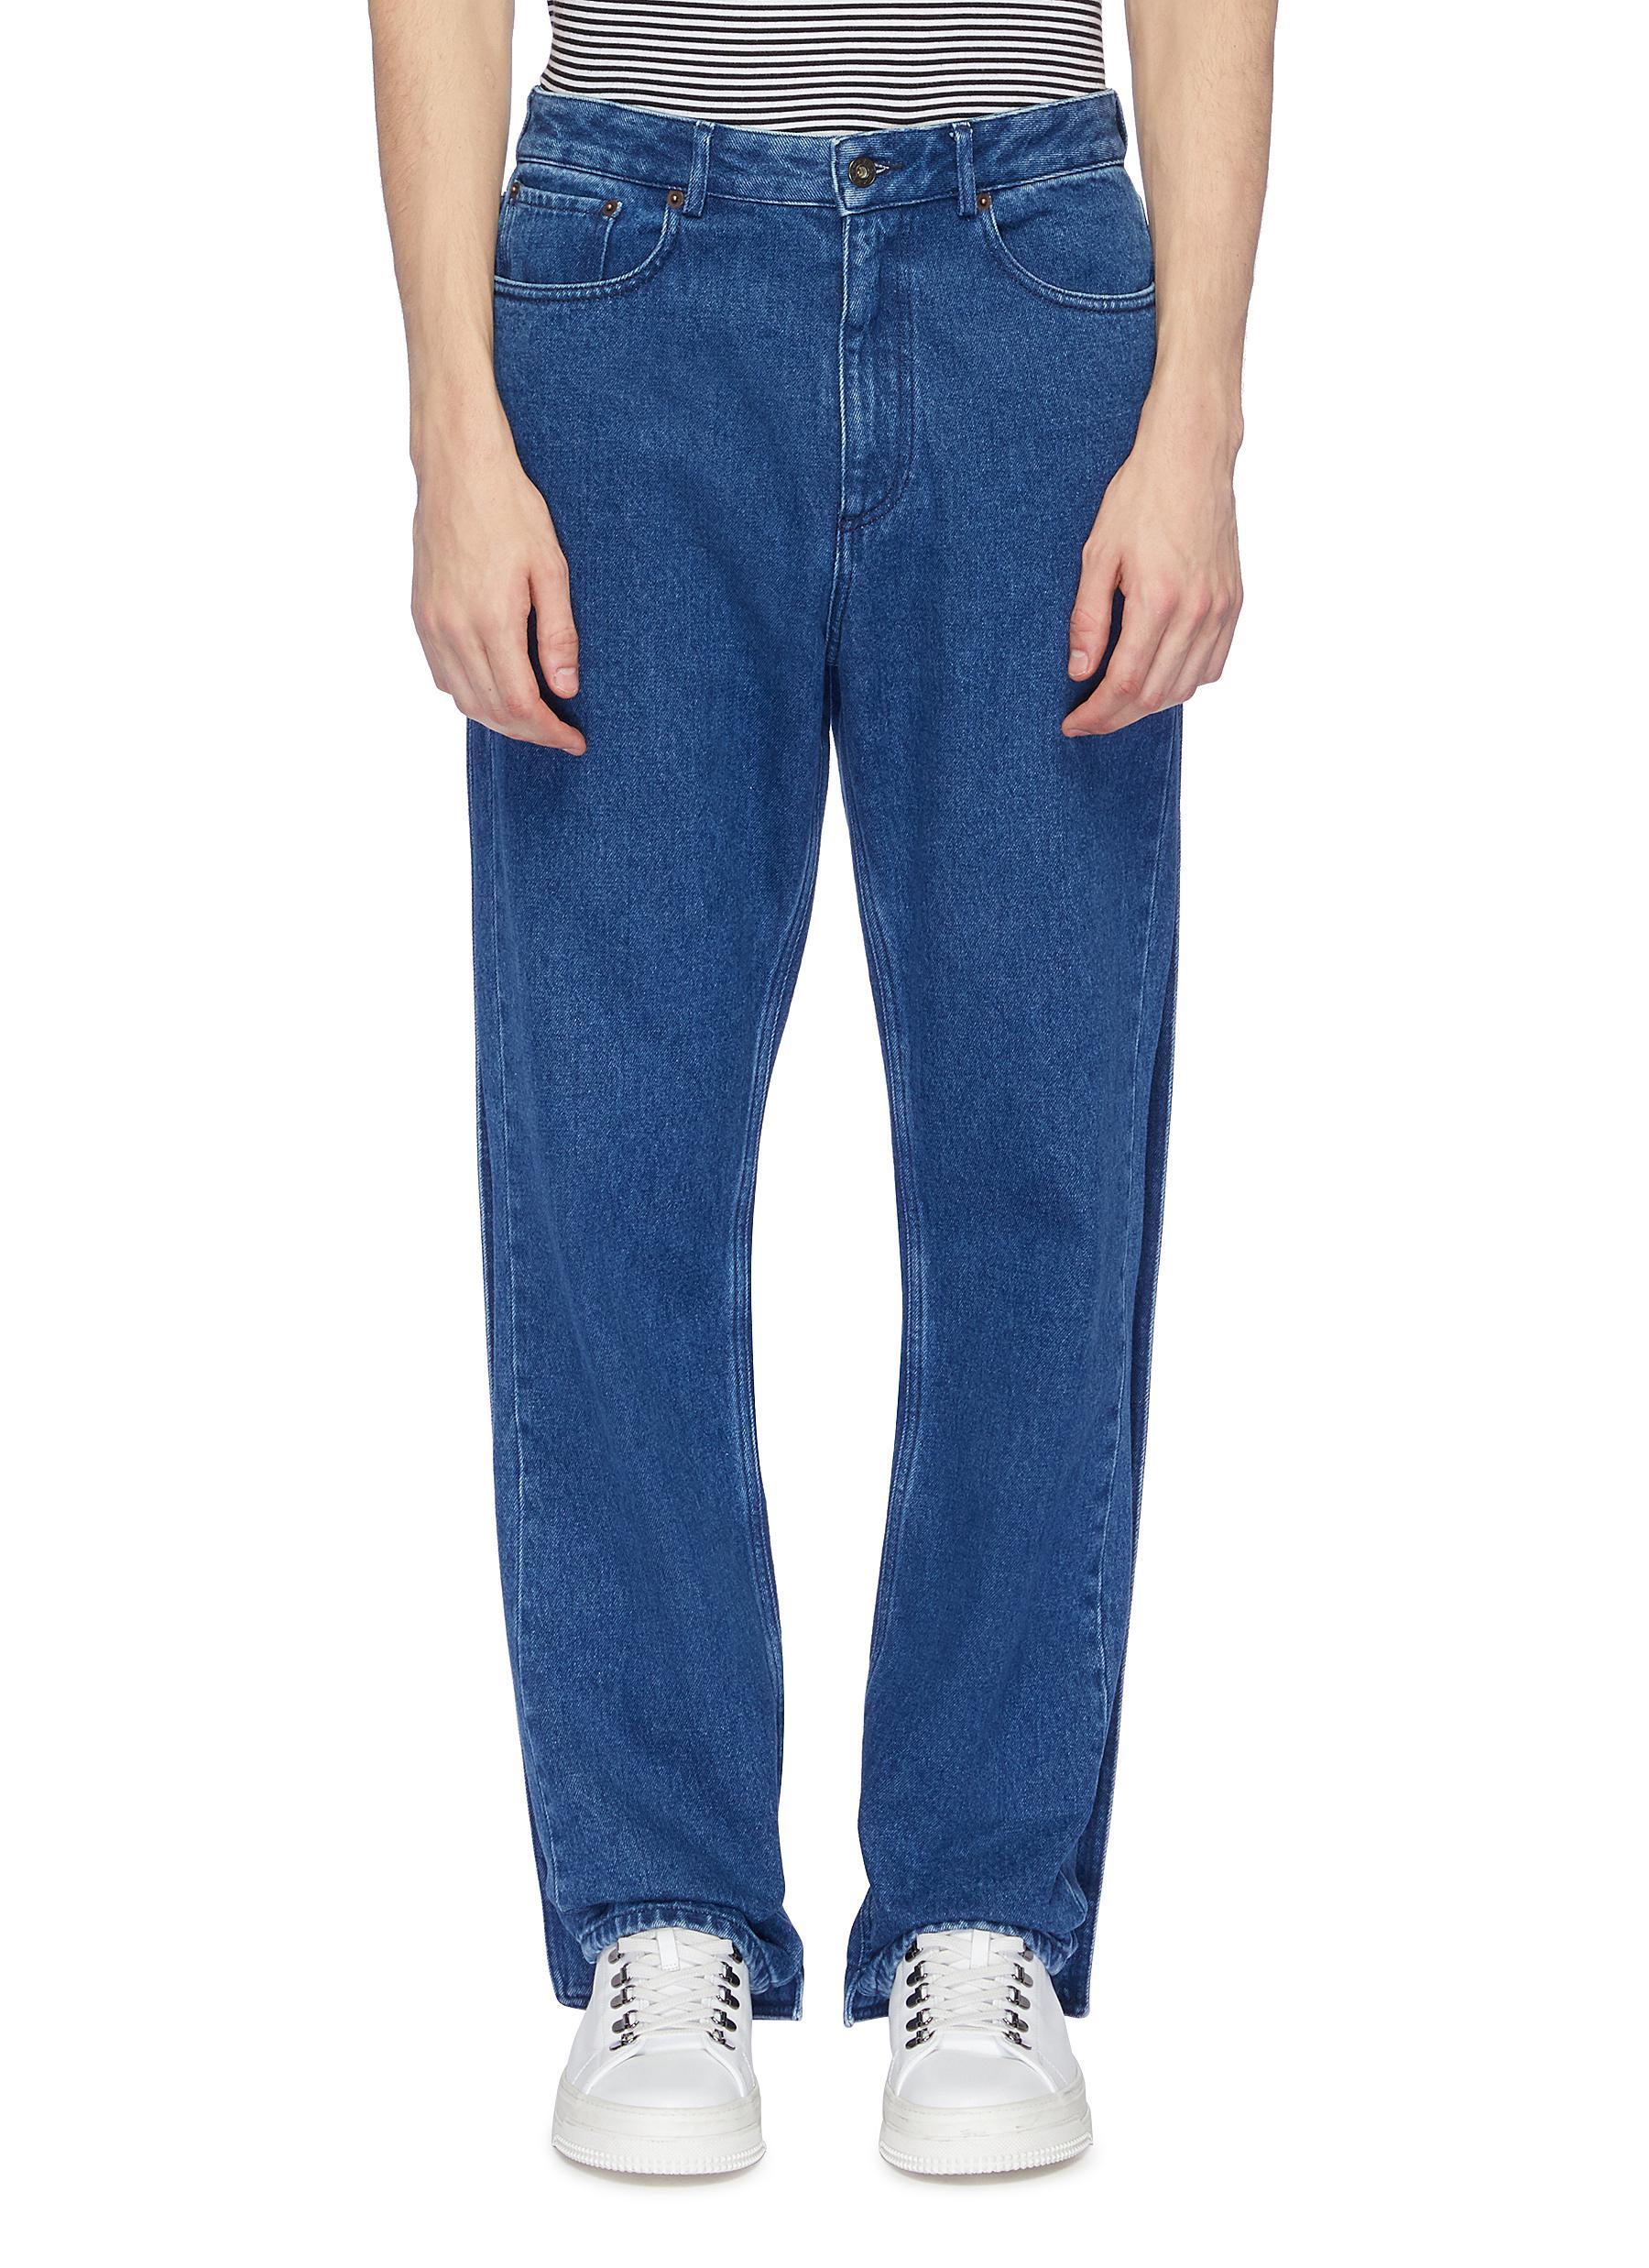 Y. Project Denim Back Panel Layered Jeans in Blue for Men | Lyst